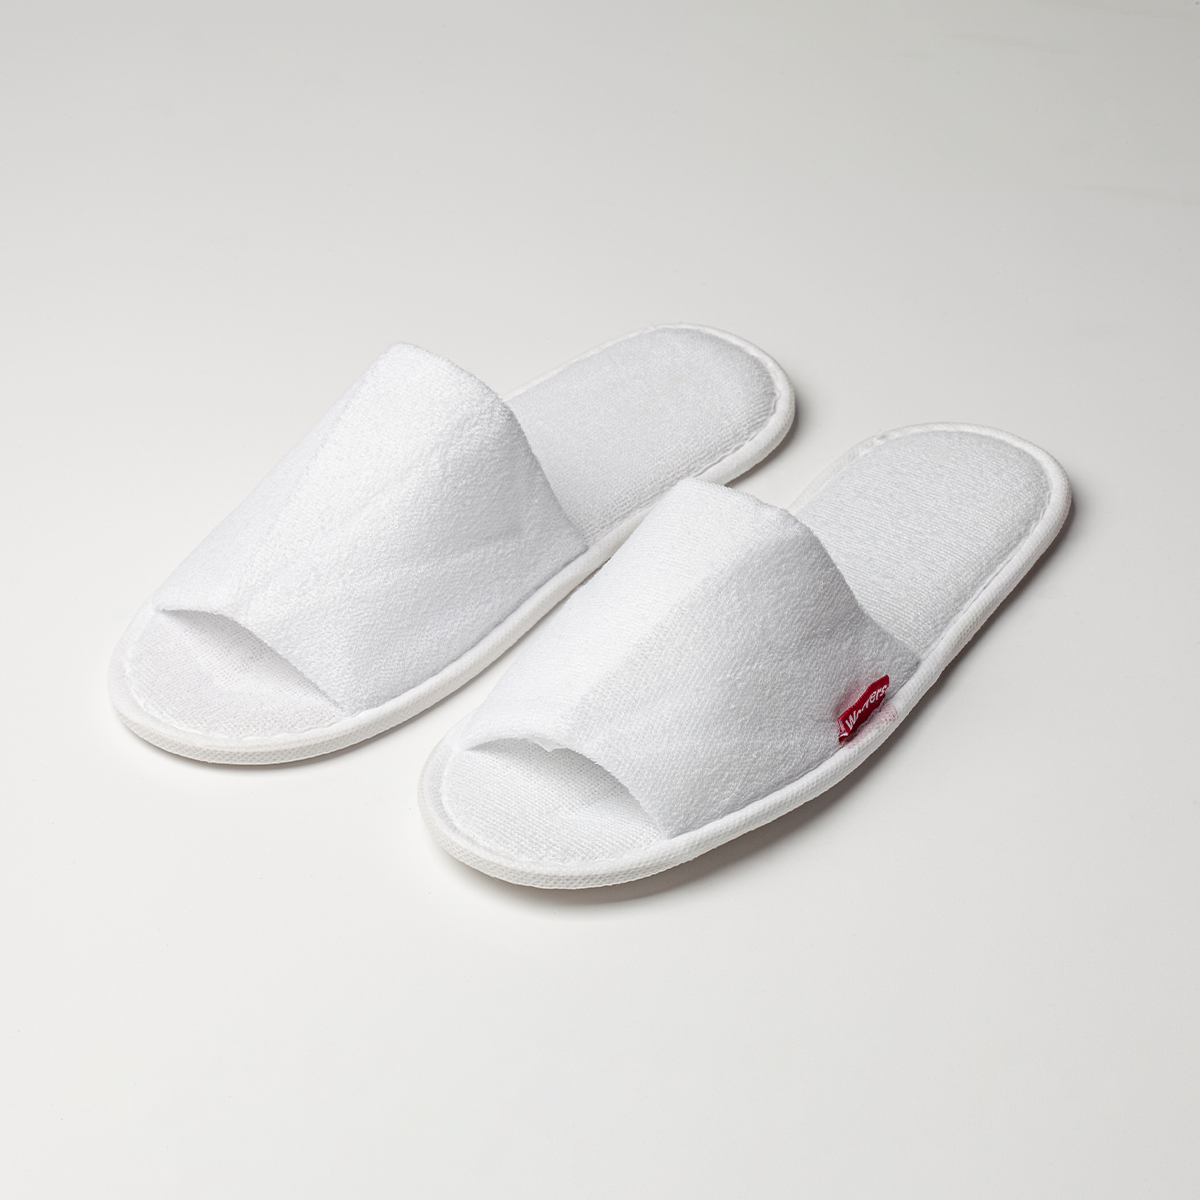 Image of Weavers Cotton Slippers Terry - Open Toe